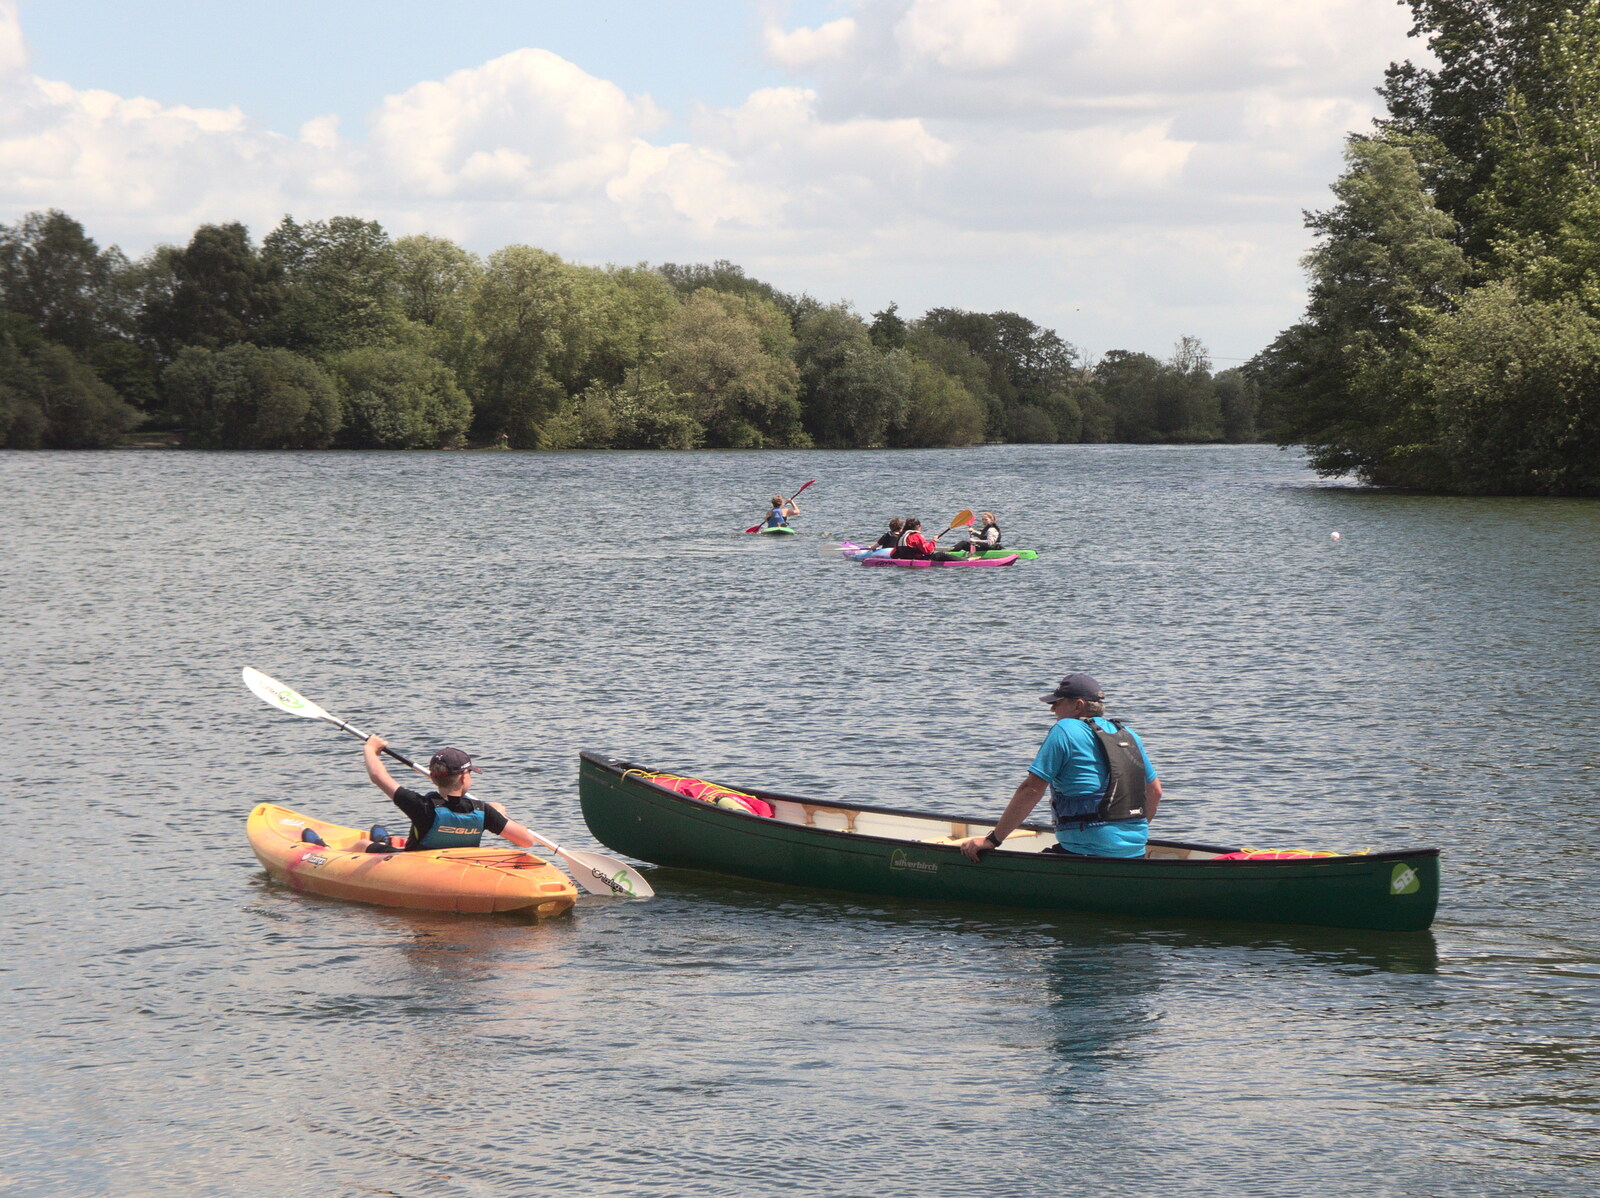 A Day at the Lake, Weybread Pits, Harleston, Norfolk - 11th June 2022: Our canoe tutor is out again